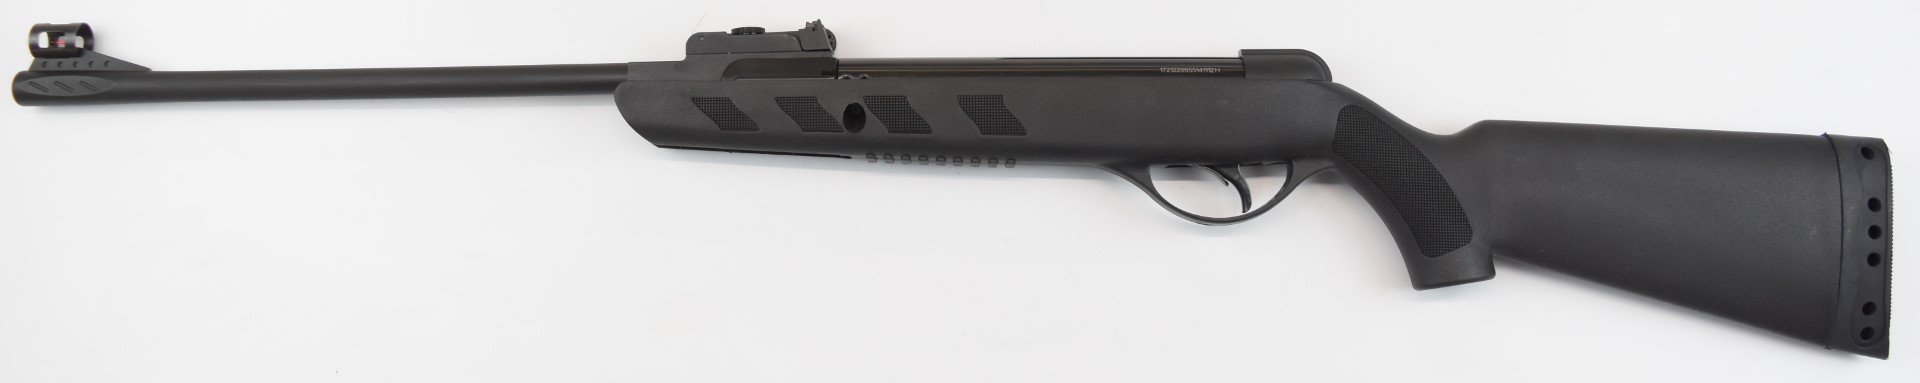 Milbro Accqr8 .22 break barrel air rifle with composite stock, chequered semi-pistol grip and forend - Image 13 of 20